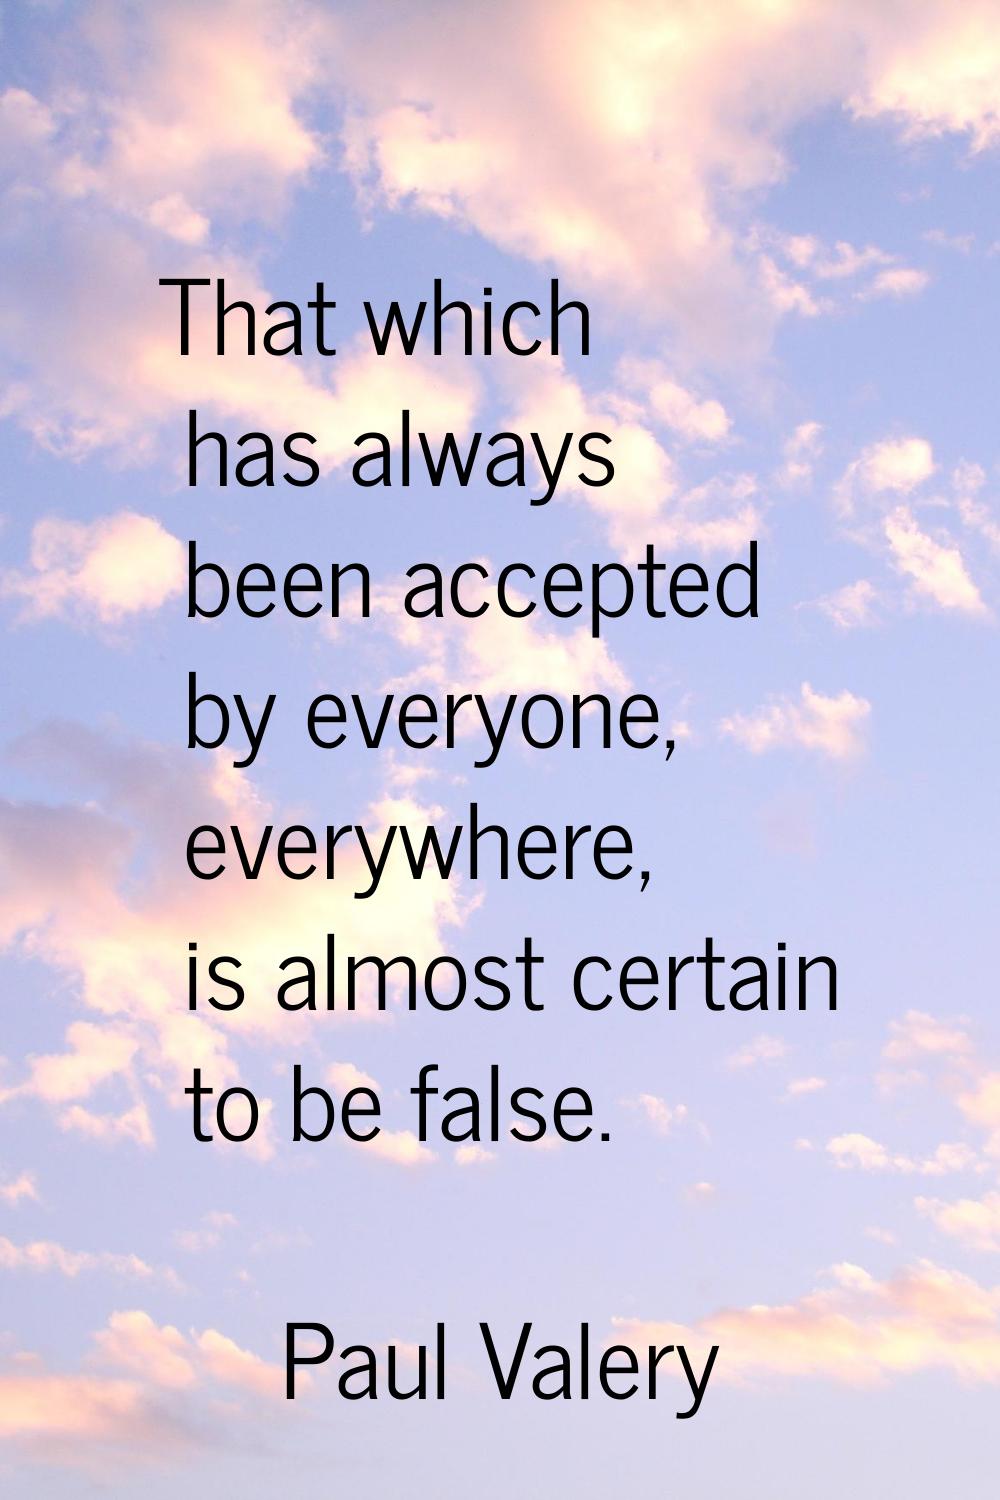 That which has always been accepted by everyone, everywhere, is almost certain to be false.